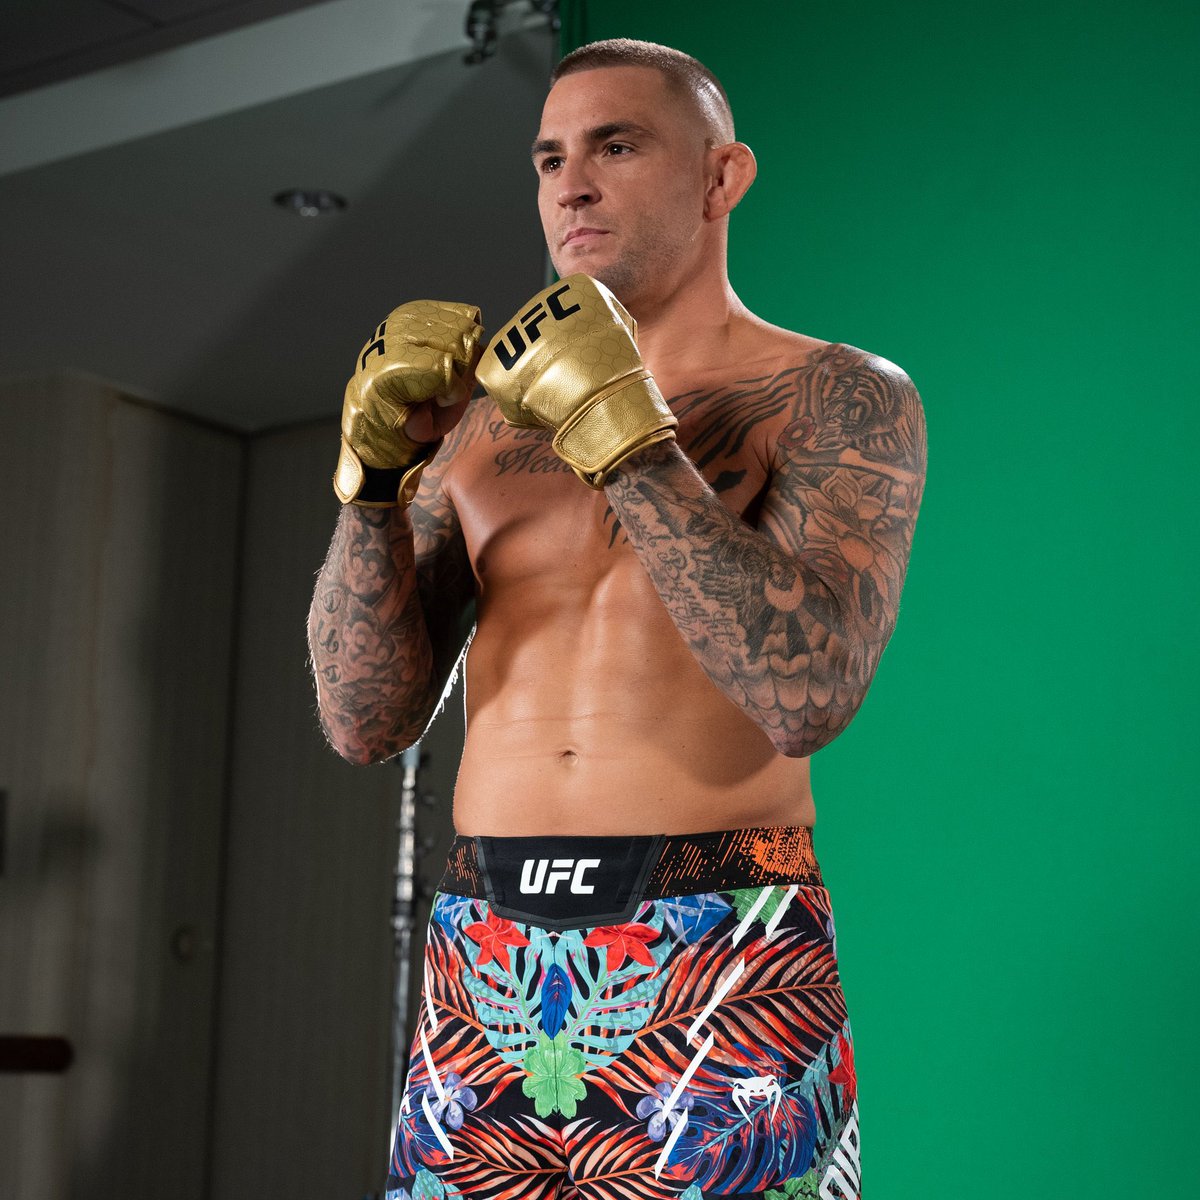 A first look at Dustin Poirier in the new gold championship gloves that will debut in the #UFC302 main event 👊